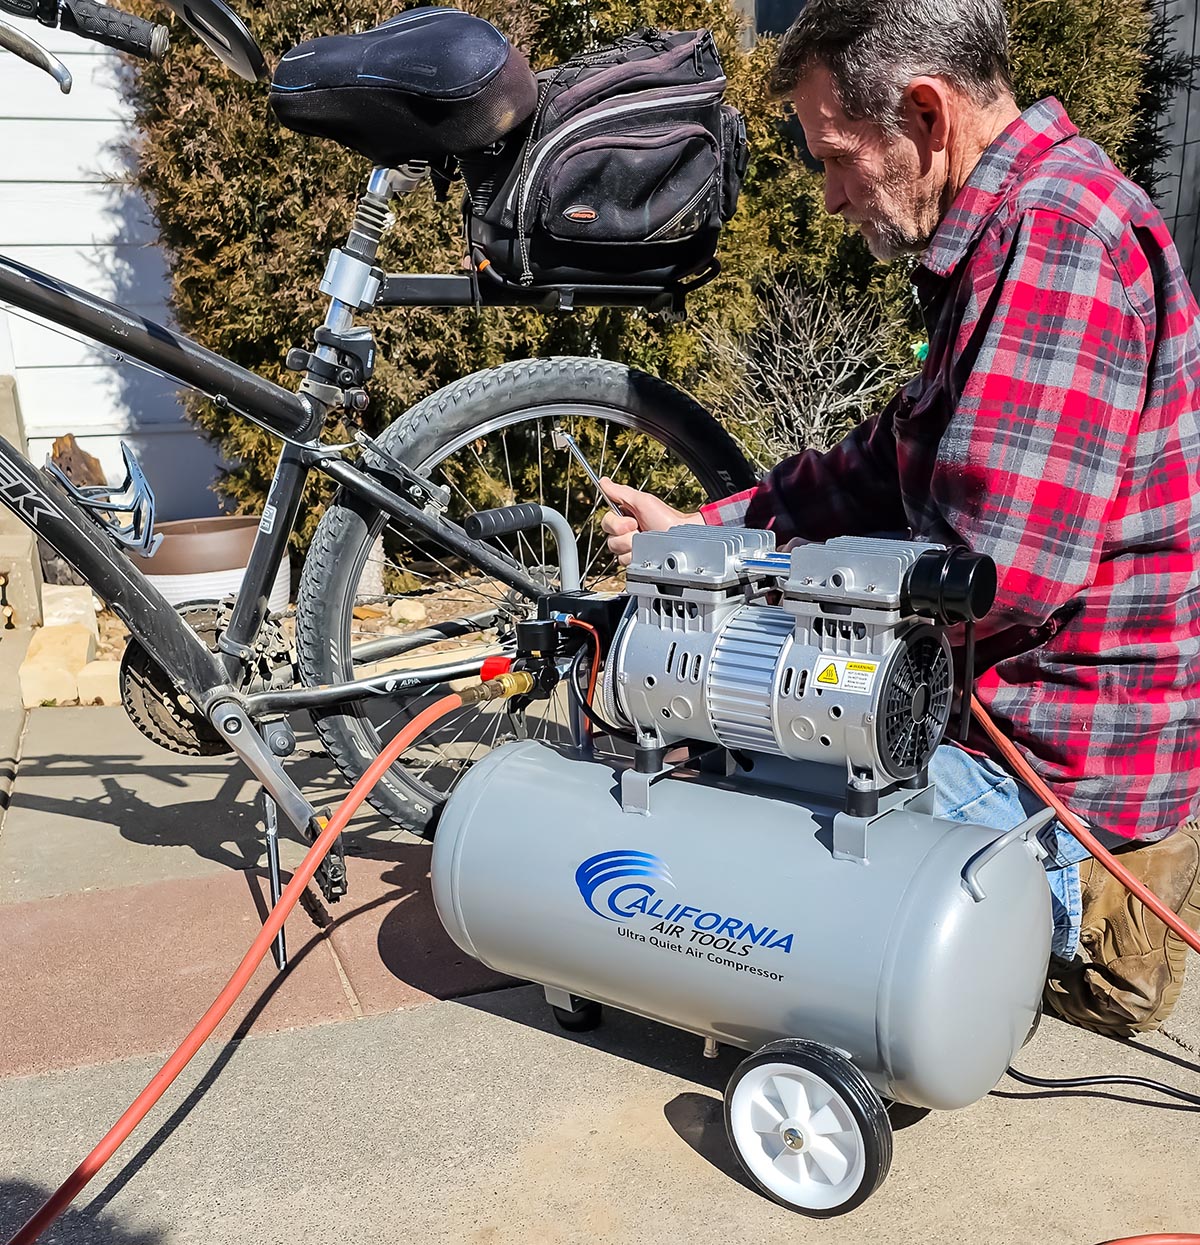 A person using the California Air Tools 8010 air compressor to inflate bike tires during testing.